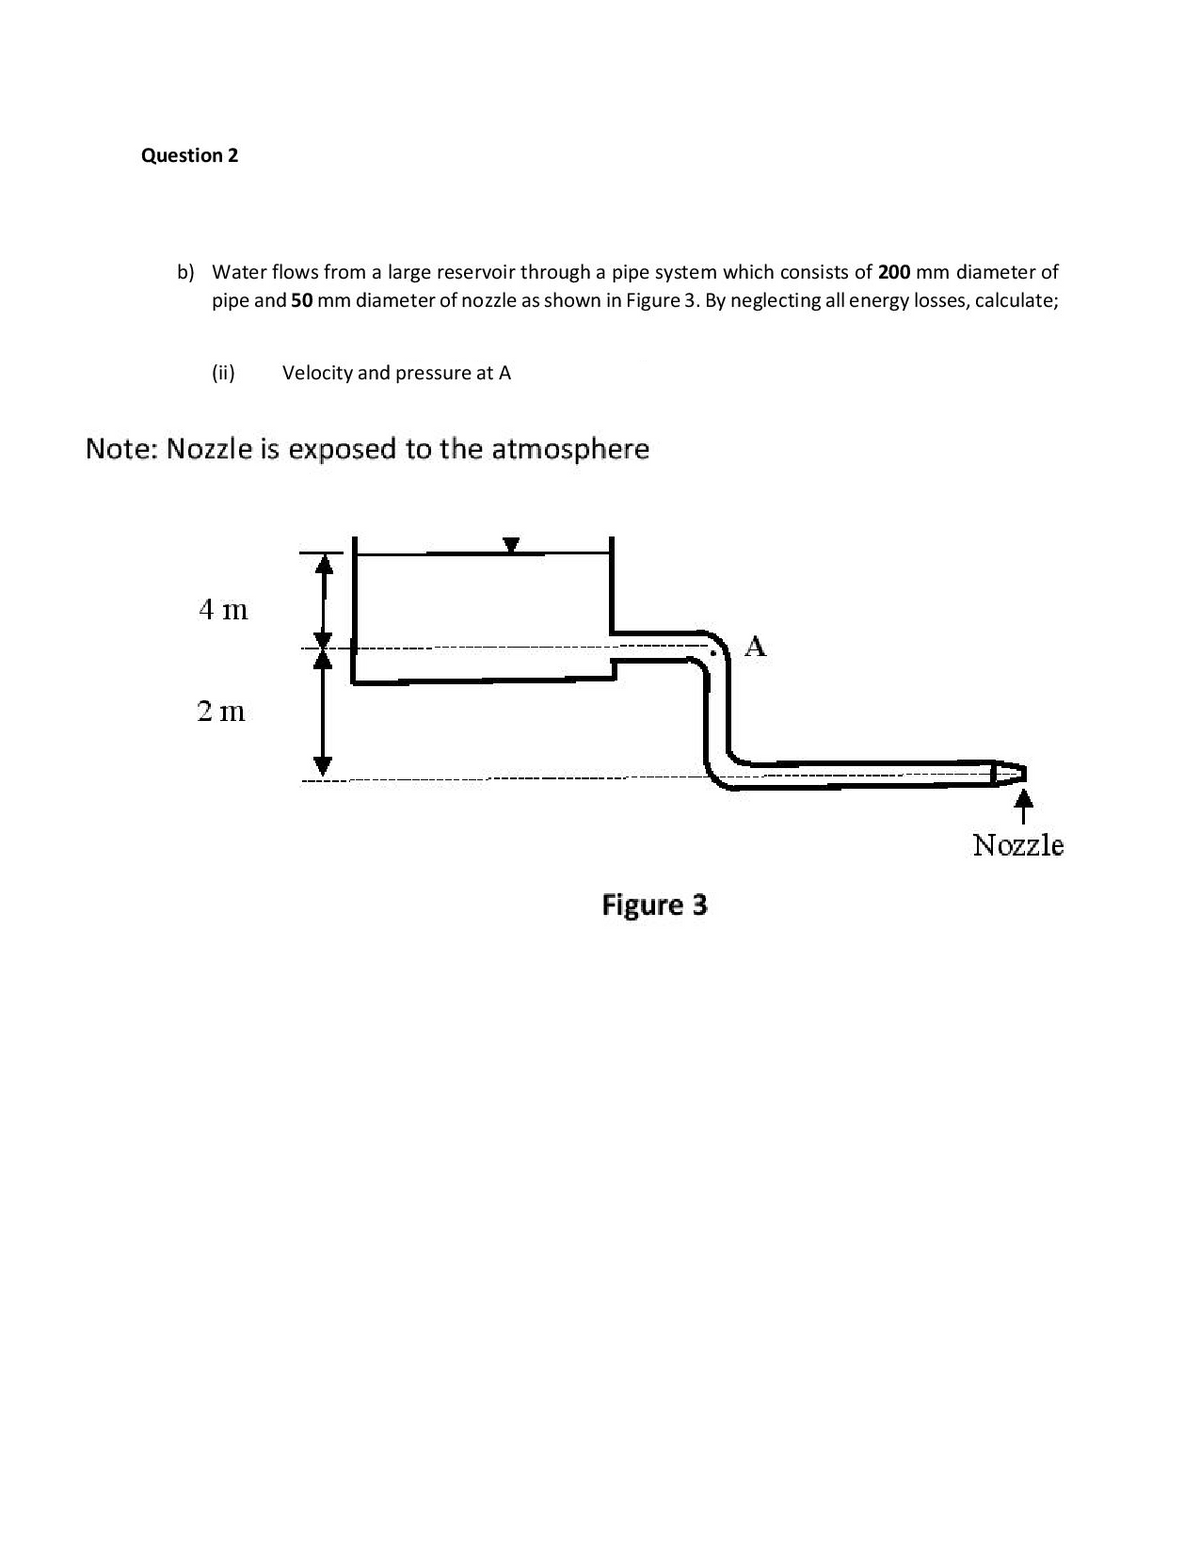 Question 2
b) Water flows from a large reservoir through a pipe system which consists of 200 mm diameter of
pipe and 50 mm diameter of nozzle as shown in Figure 3. By neglecting all energy losses, calculate;
(ii)
Velocity and pressure at A
Note: Nozzle is exposed to the atmosphere
4 m
2 m
Nozzle
Figure 3
